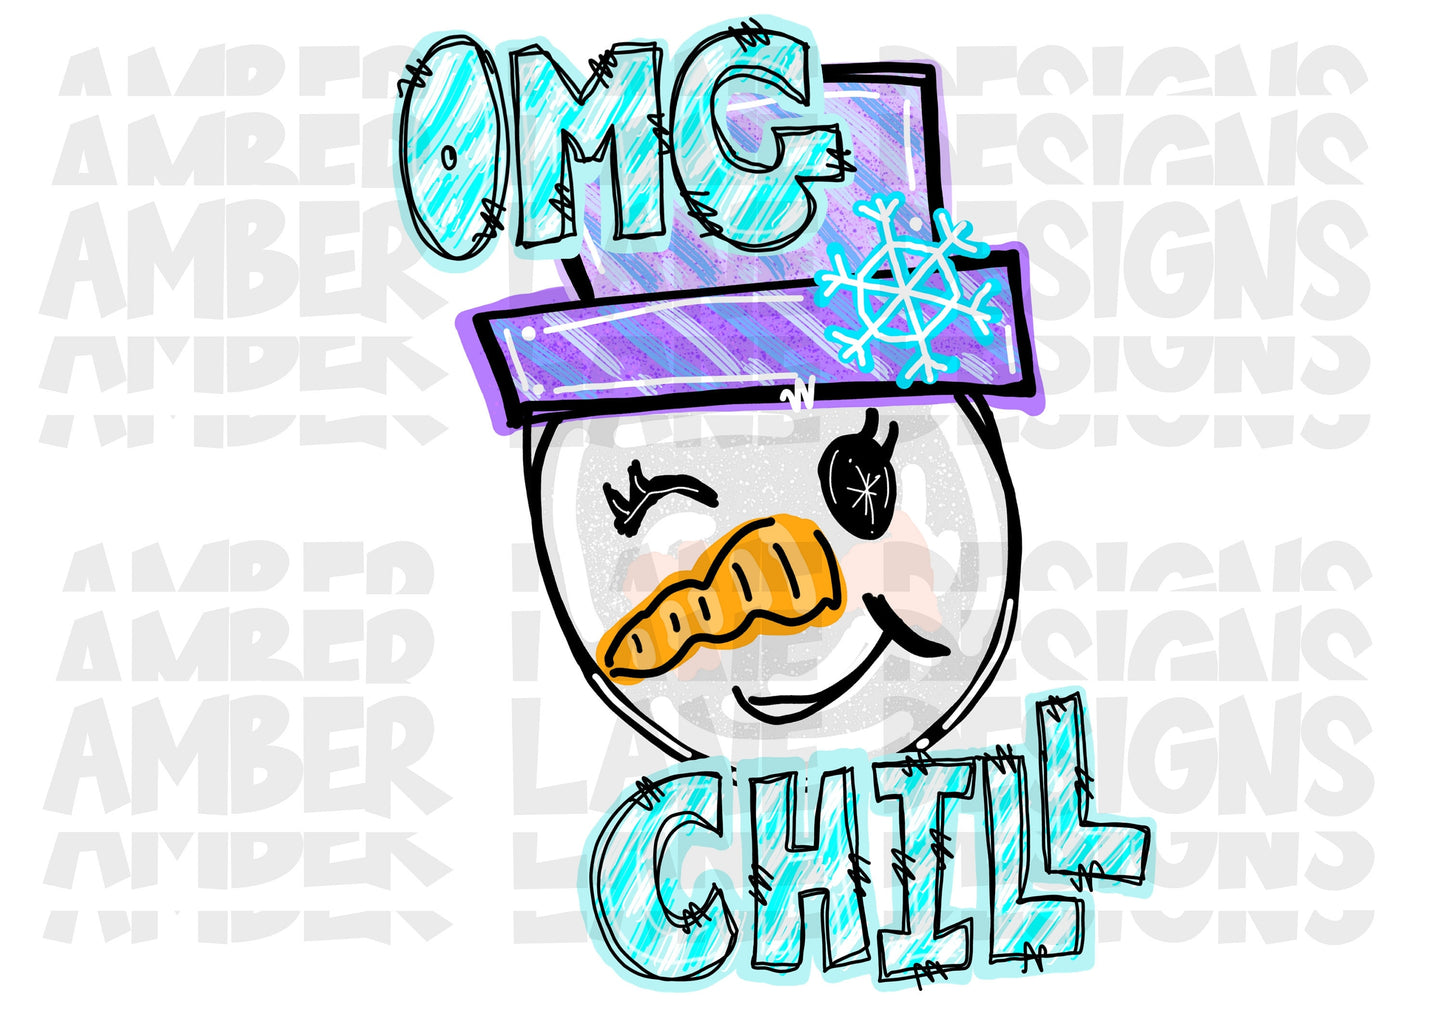 Chill Vibes Express: 'OMG Chill' Snowman PNG for Christmas Frosty Fun Alert Snowman Sensation, Winter Wow Factor, Ice Cold Cutie